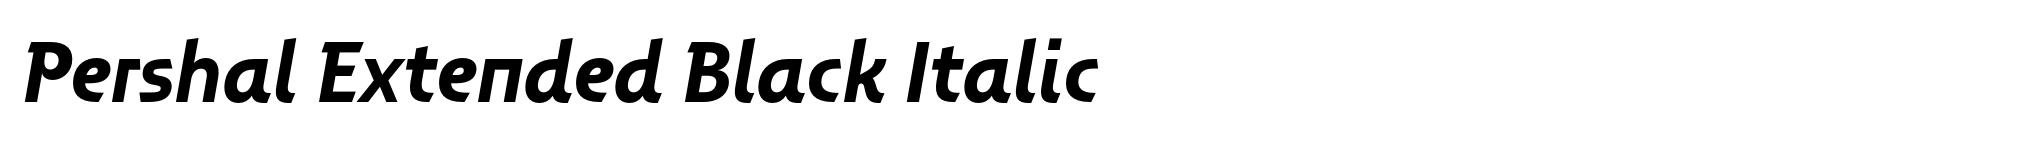 Pershal Extended Black Italic image